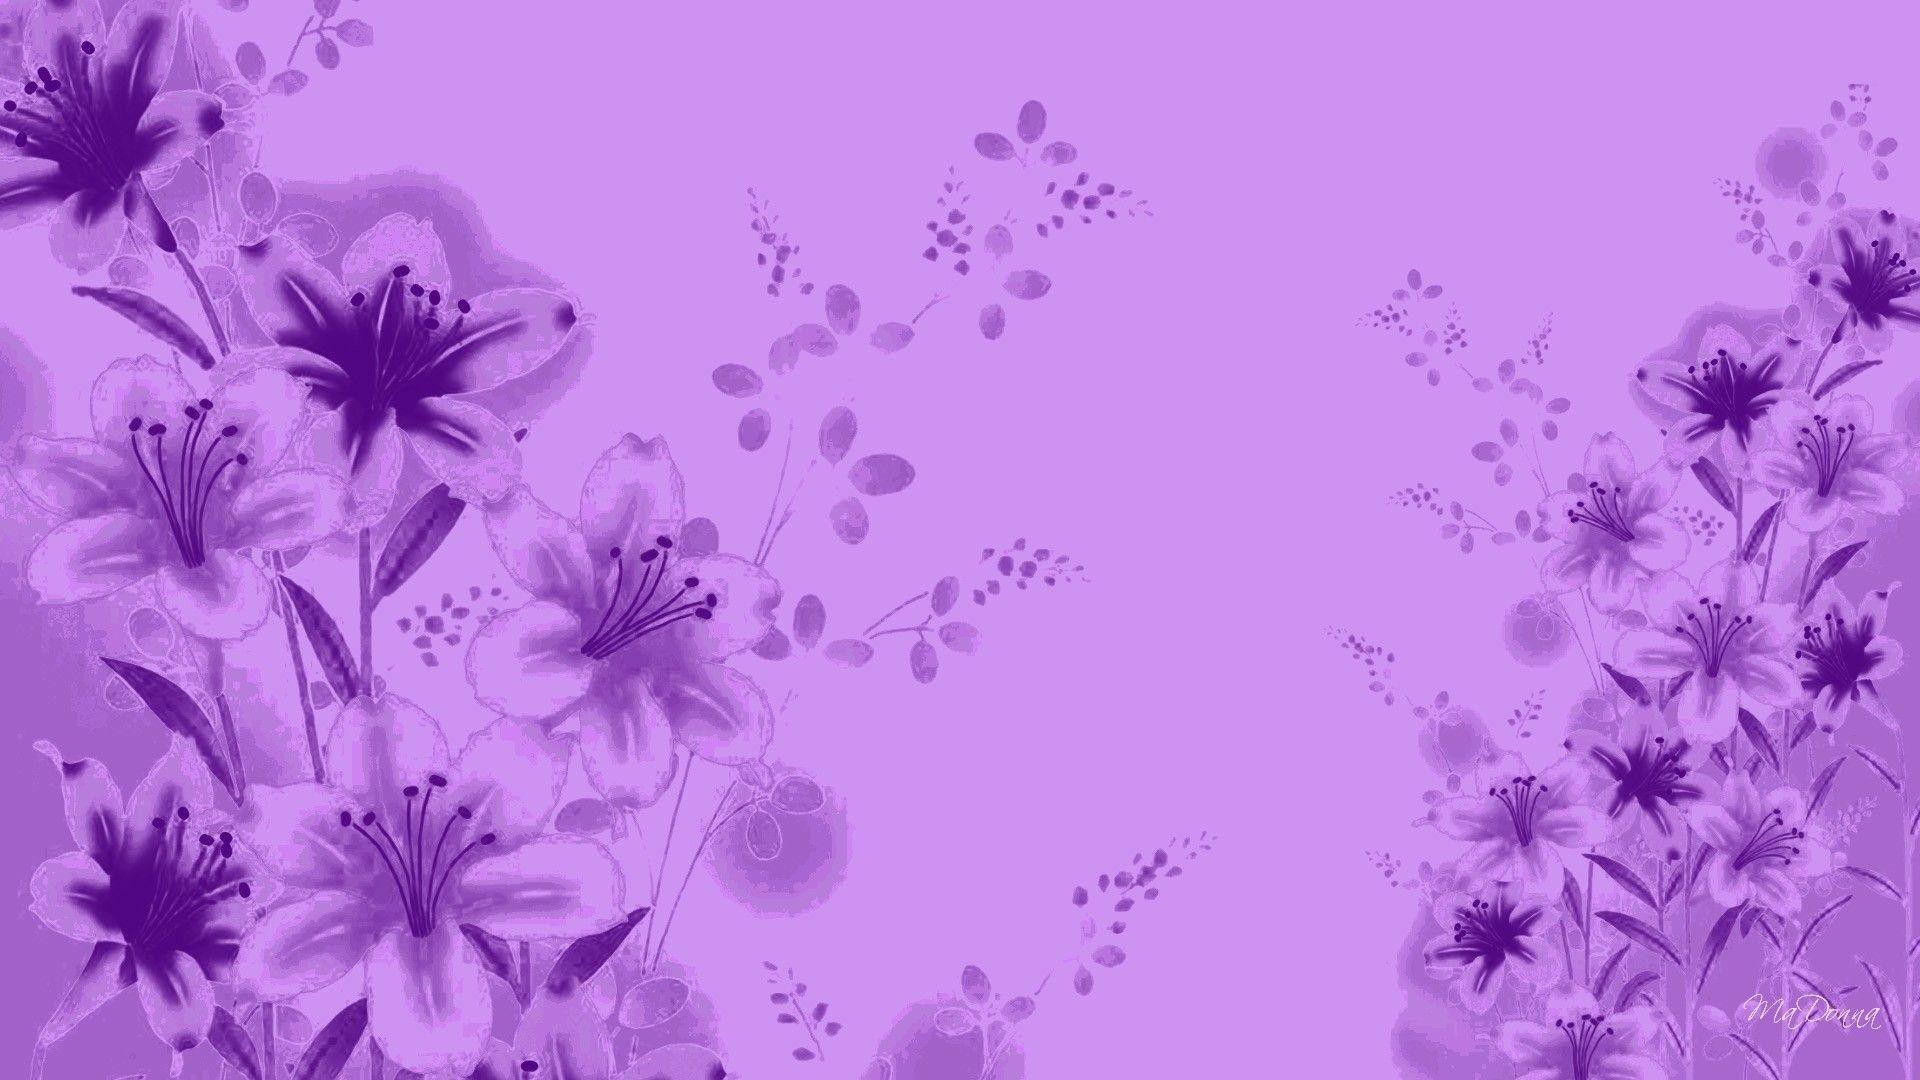 Lavender Aesthetic Wallpapers - Top Free Lavender Aesthetic Backgrounds